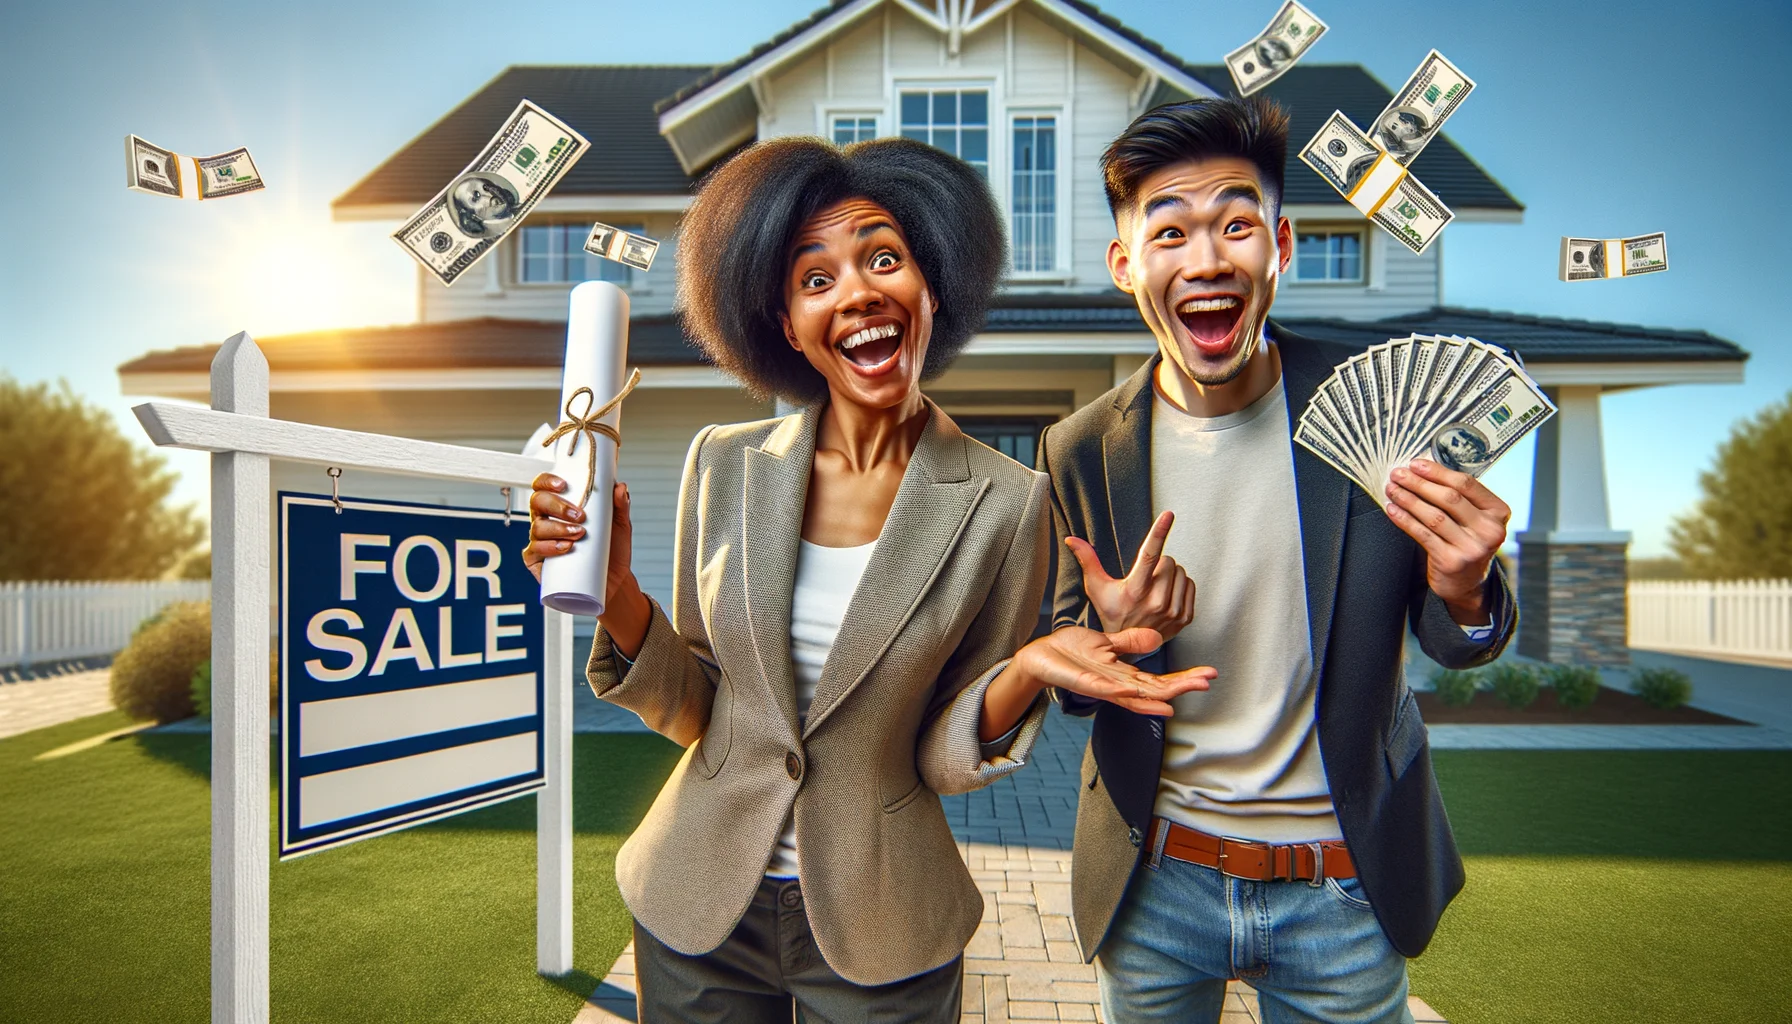 Picture a humorous and highly idealistic scenario of negotiating home prices. In the center, there's an African-descent woman cheerful and confident, holding a rolled-up house blueprint, wearing a typical real estate agent blazer. Facing her is a thrilled South-Asian man showing a wad of cash with a triumphant smile, wearing casual but neat attire. The backdrop is an immaculate white modern home with a 'For Sale' sign which has prices changing to lower numbers like a stock market ticker. Everything is radiating sunshine, expressing perfect negotiation conditions.